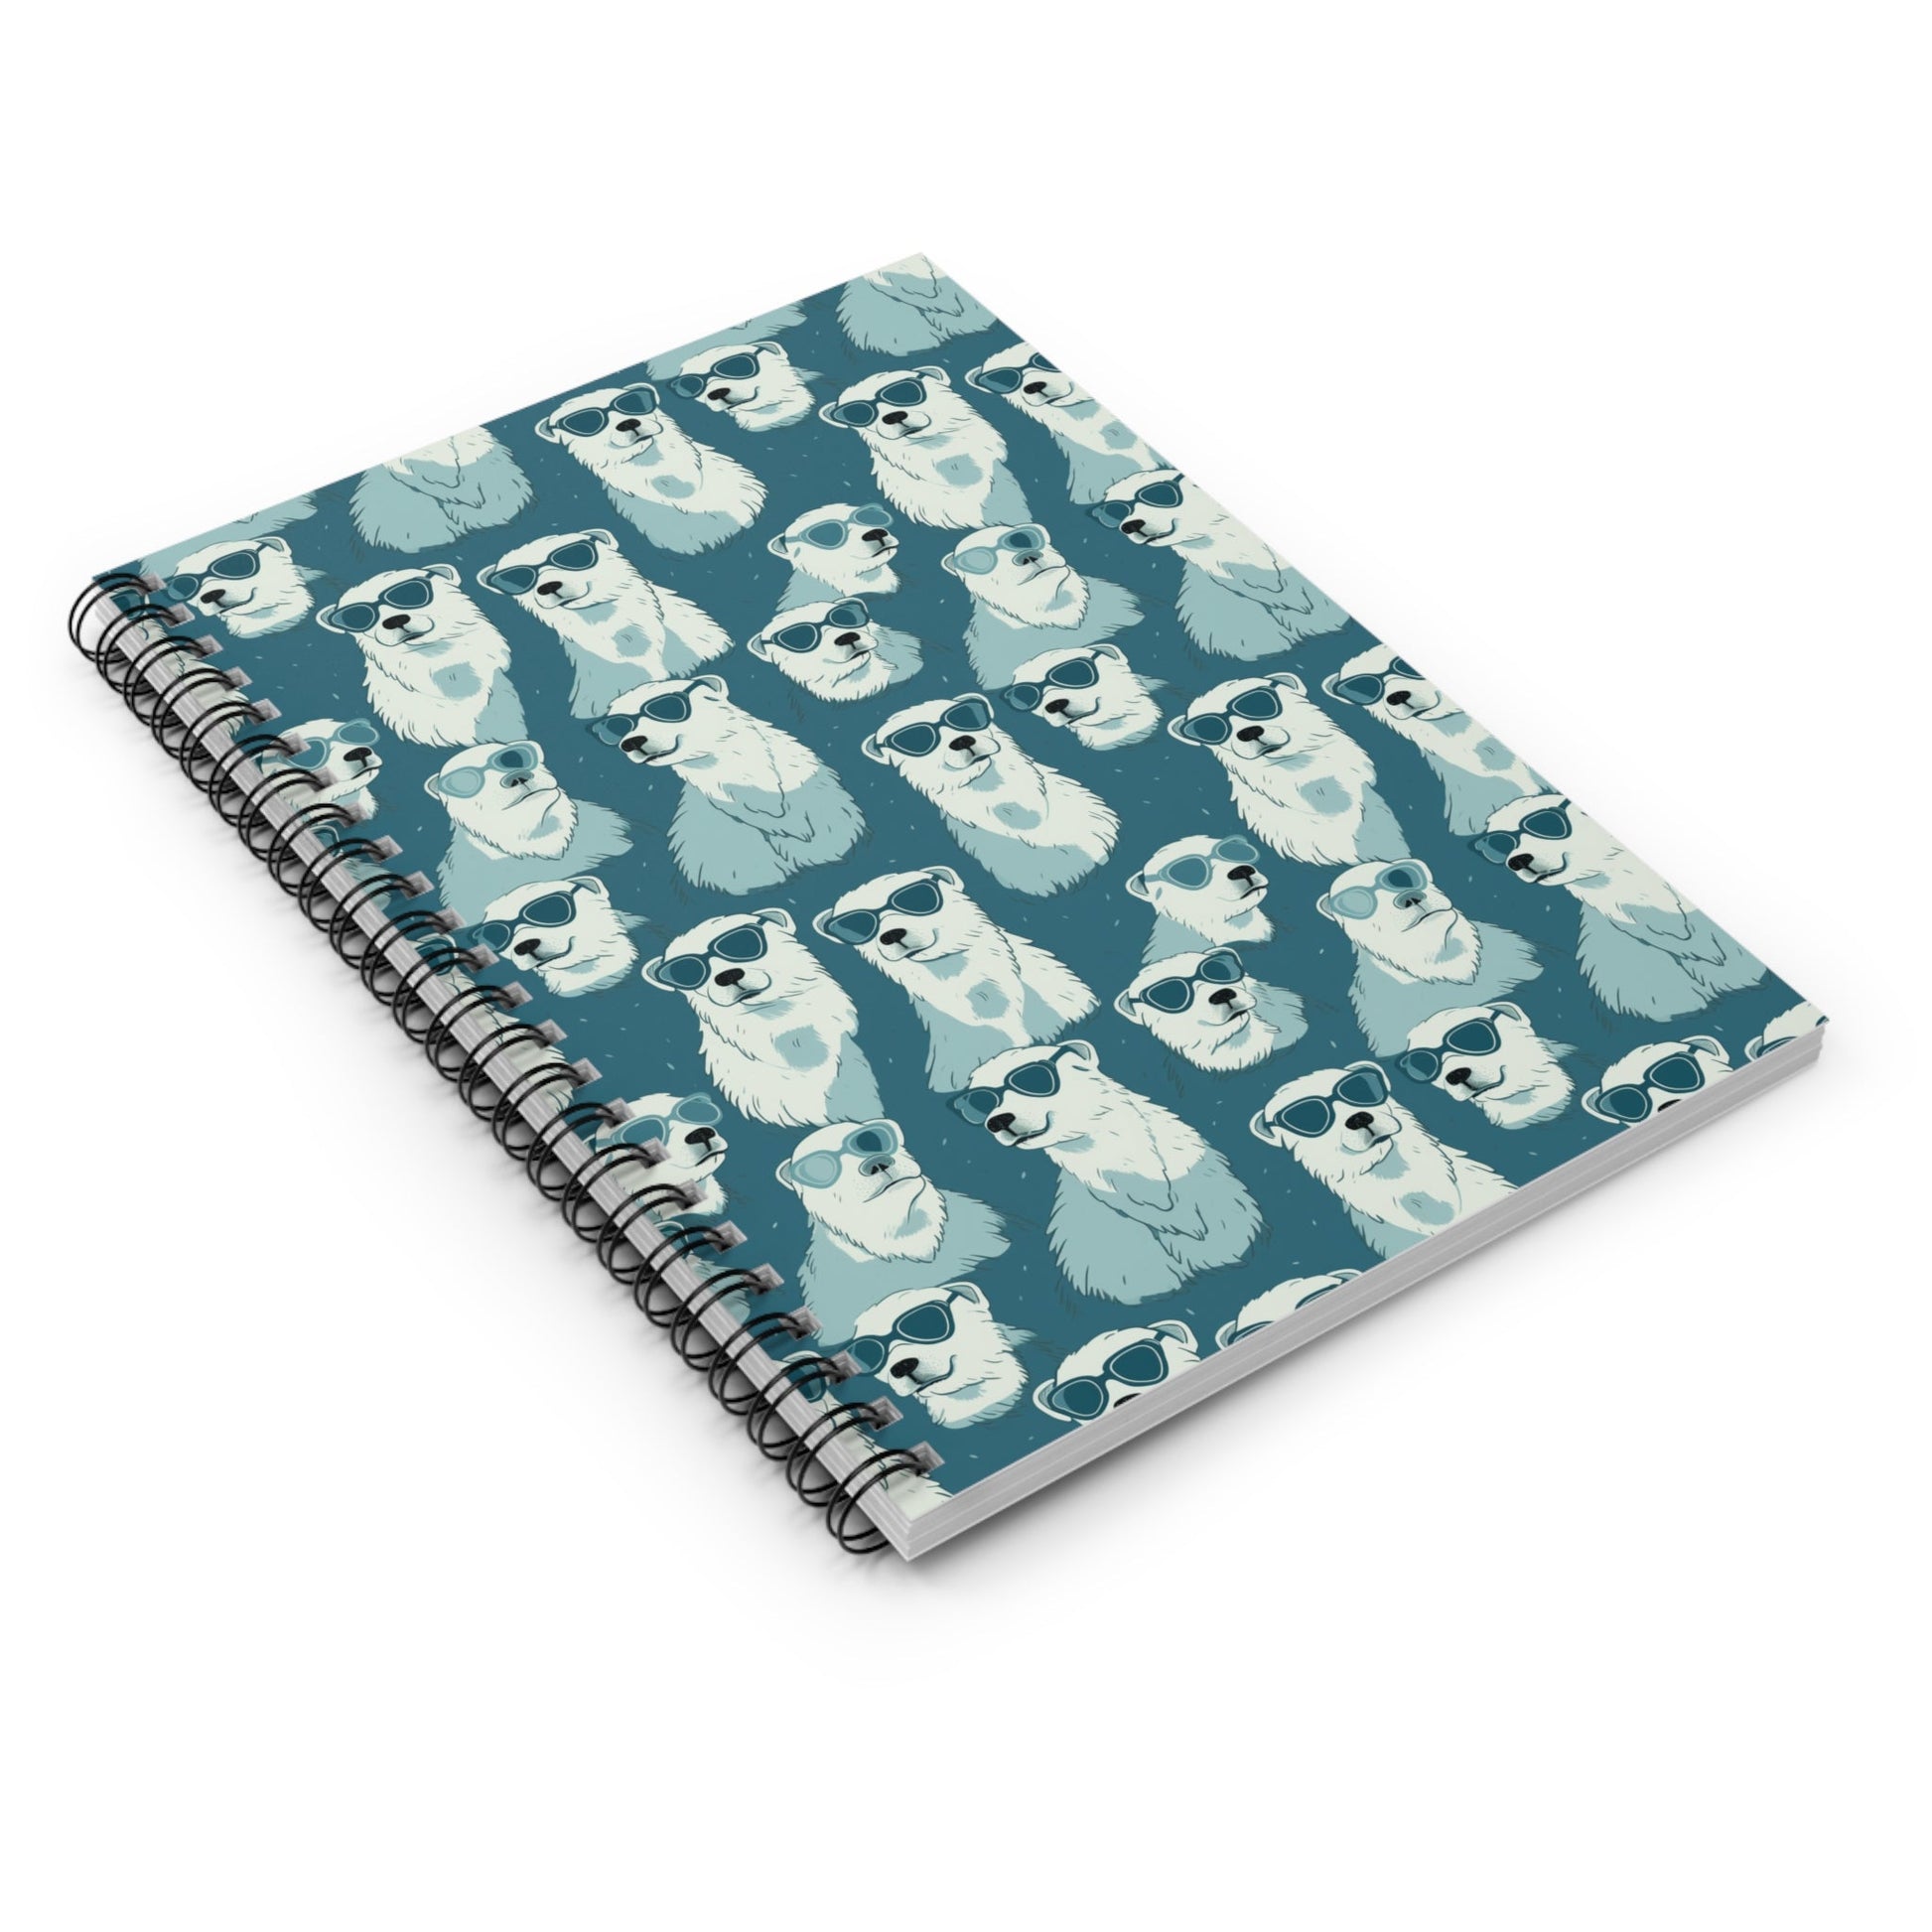 Chillin' Polar Bears Spiral Notebook - Ruled Line Paper products Pattern Symphony   